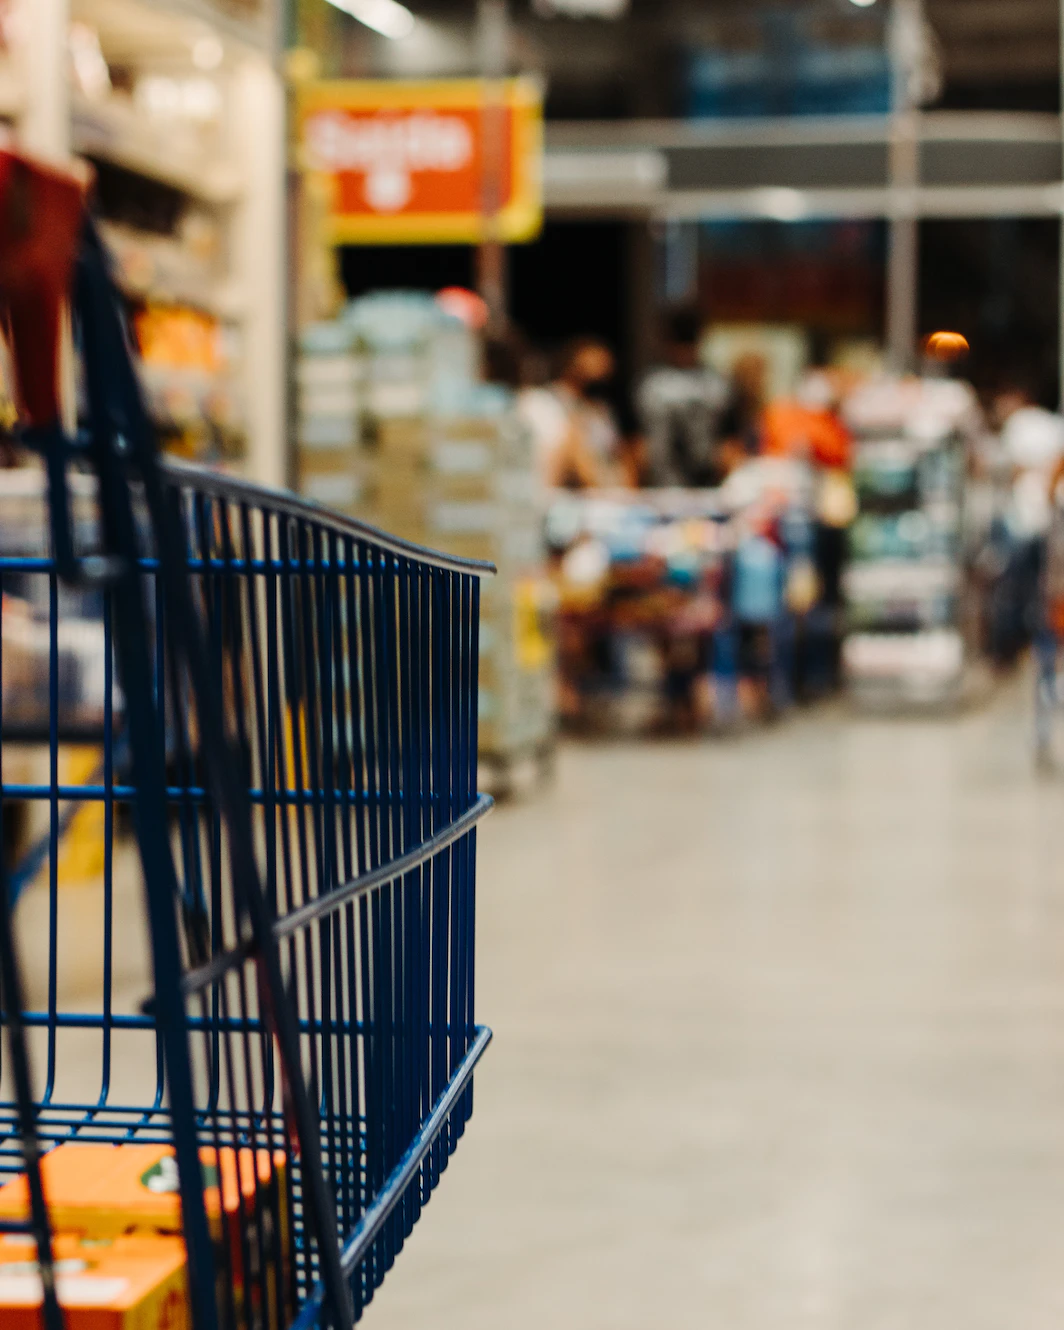 10 Ways to Save Money on Your Grocery Bill